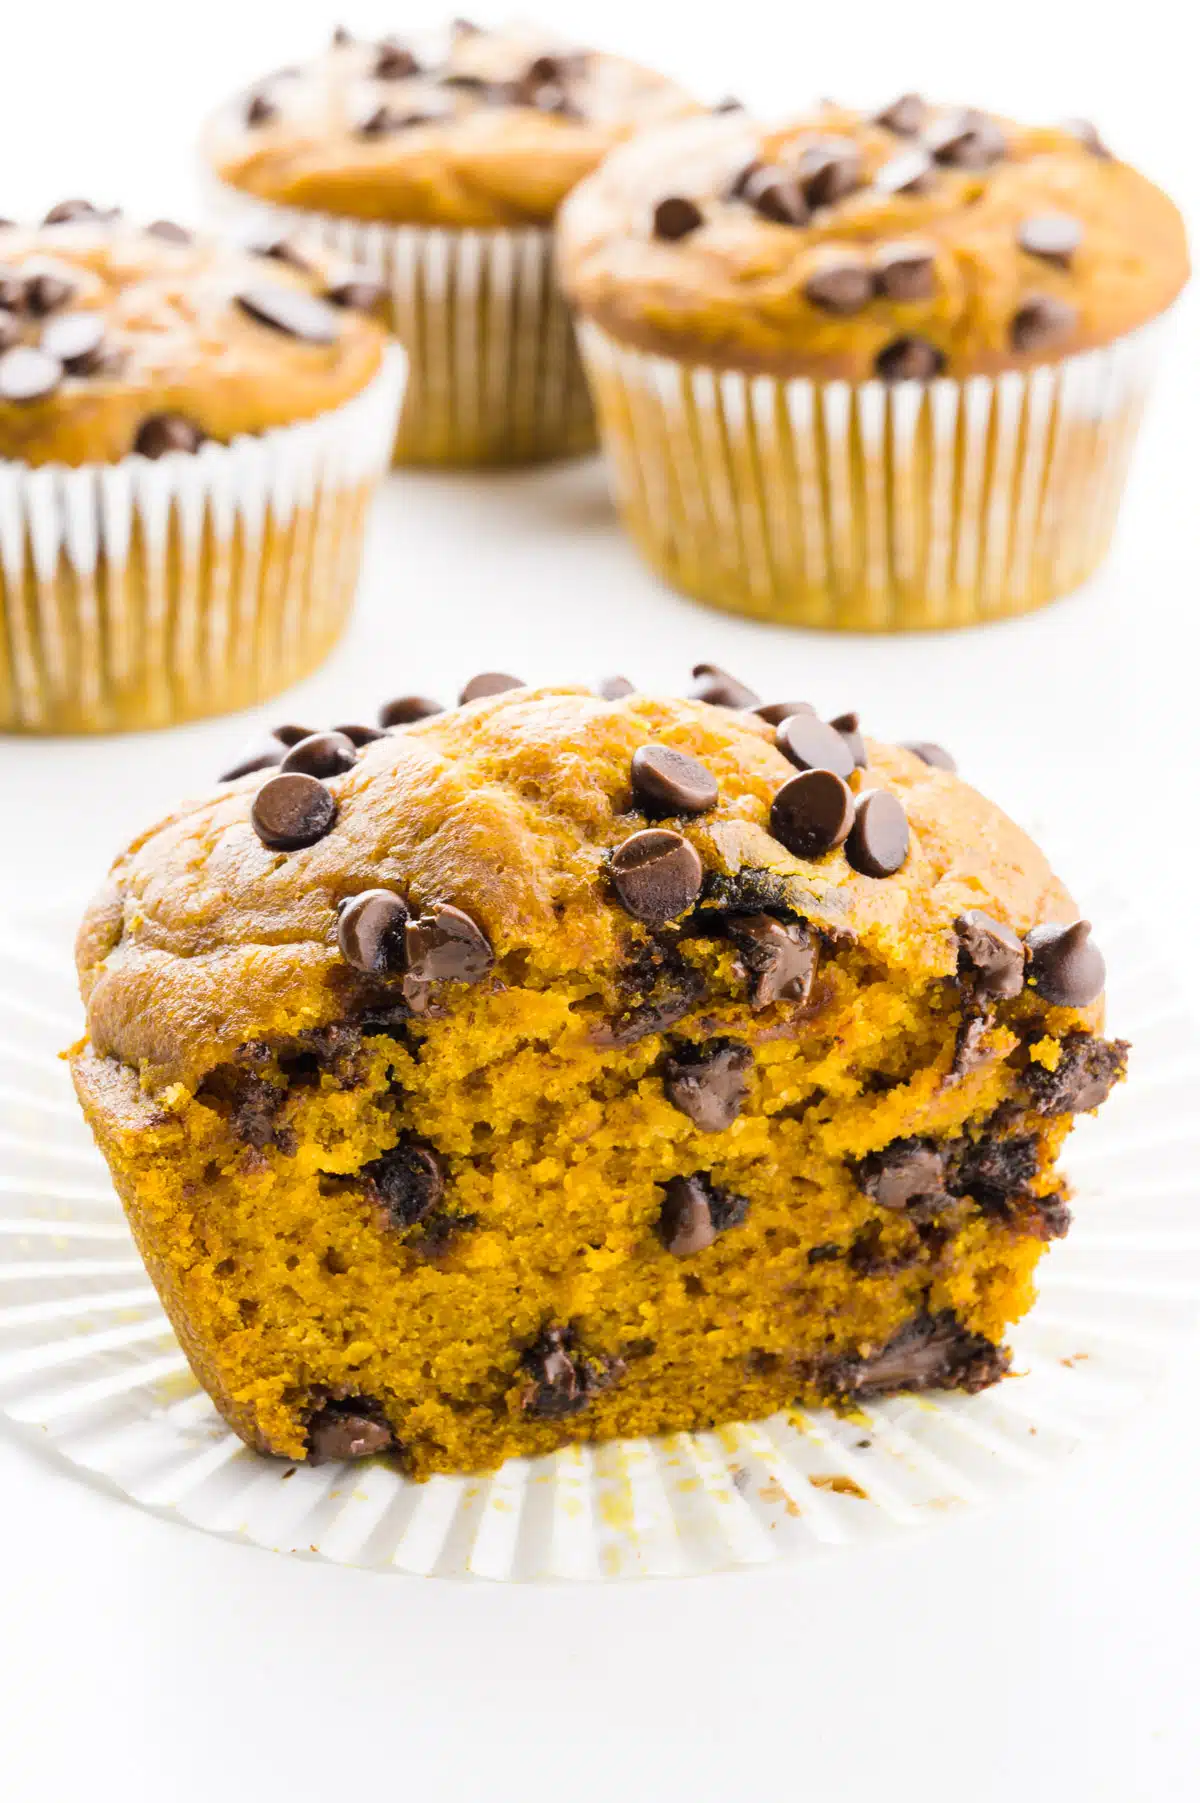 A muffin is cut in half showing chocolate chips in the middle and on top. There are more muffins behind it.